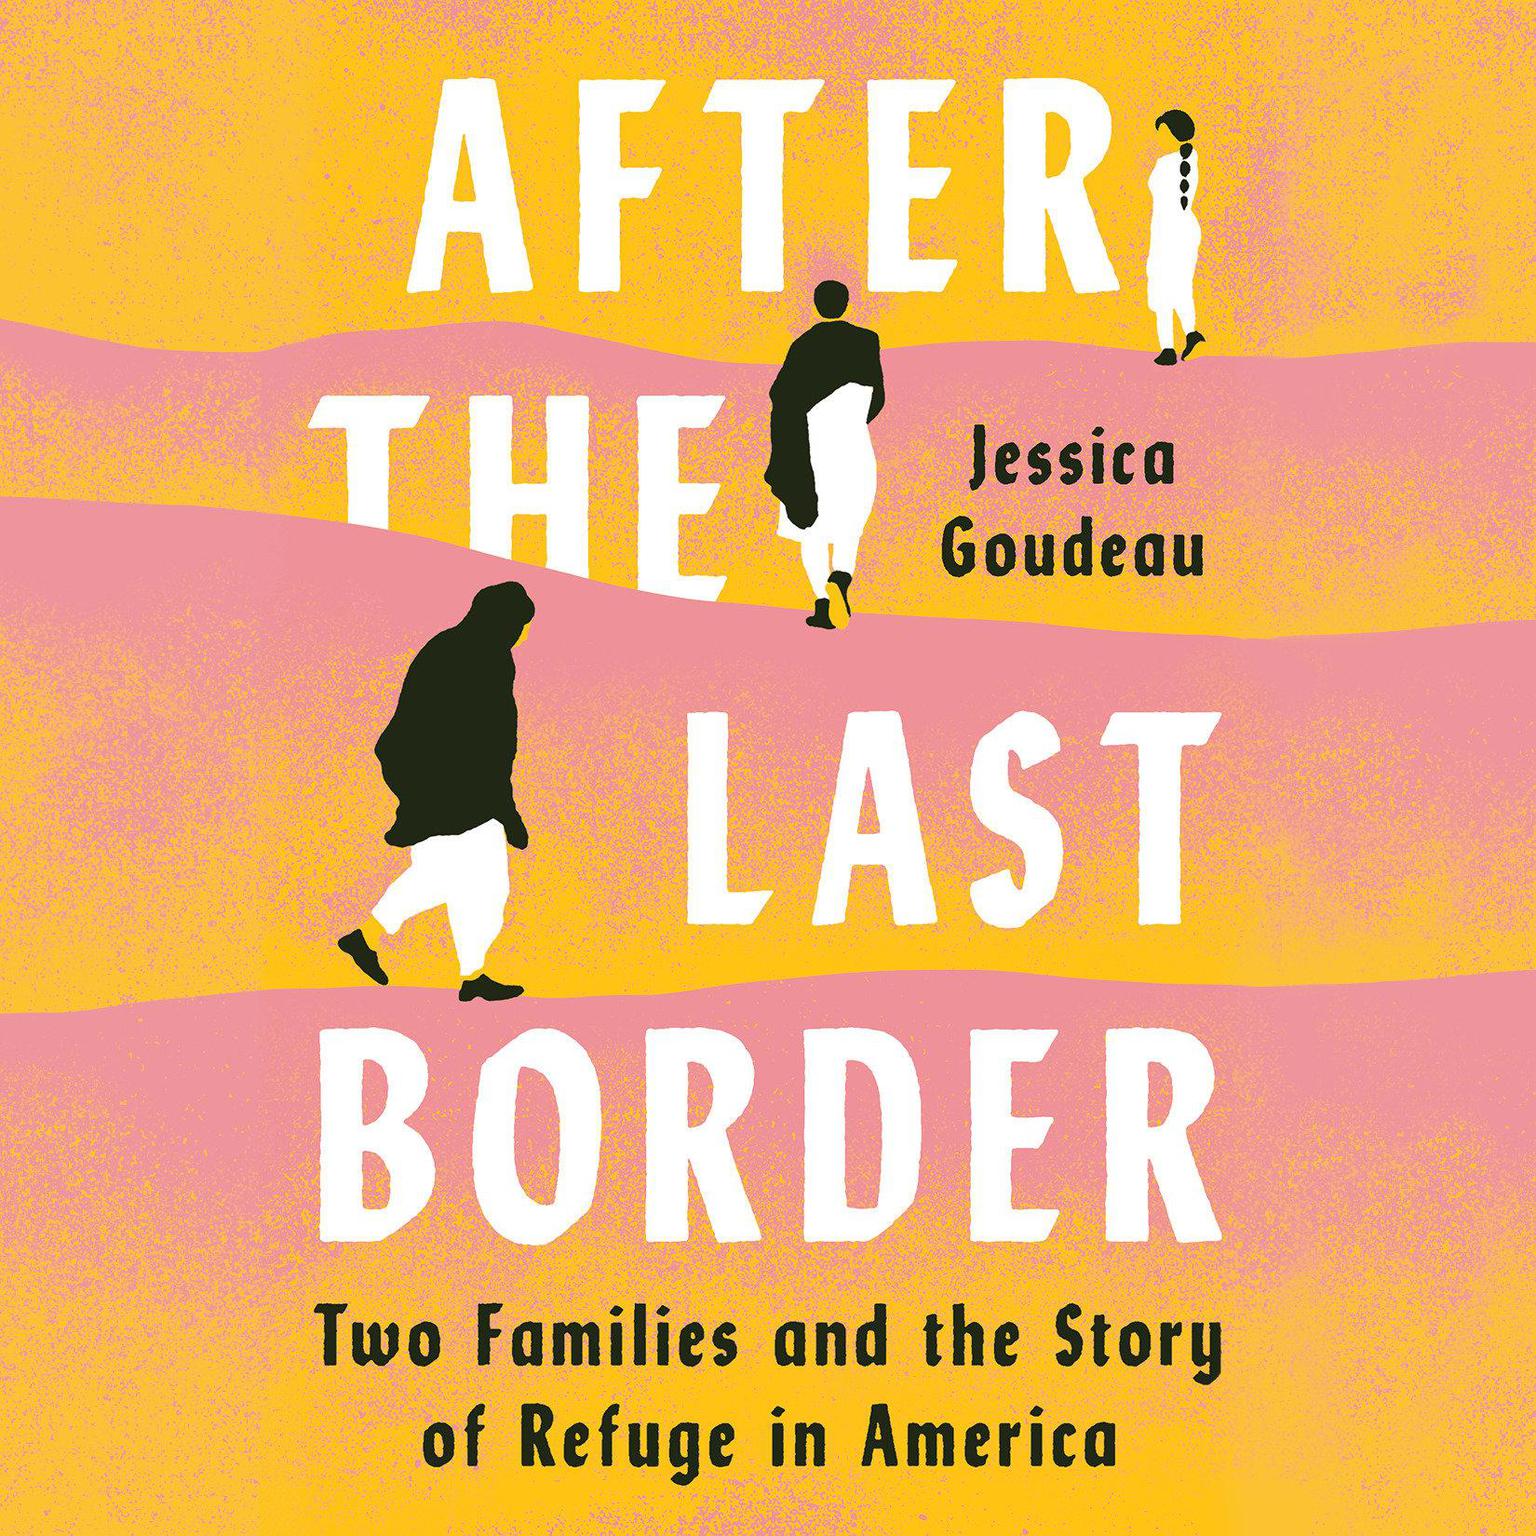 After the Last Border: Two Families and the Story of Refuge in America Audiobook, by Jessica Goudeau